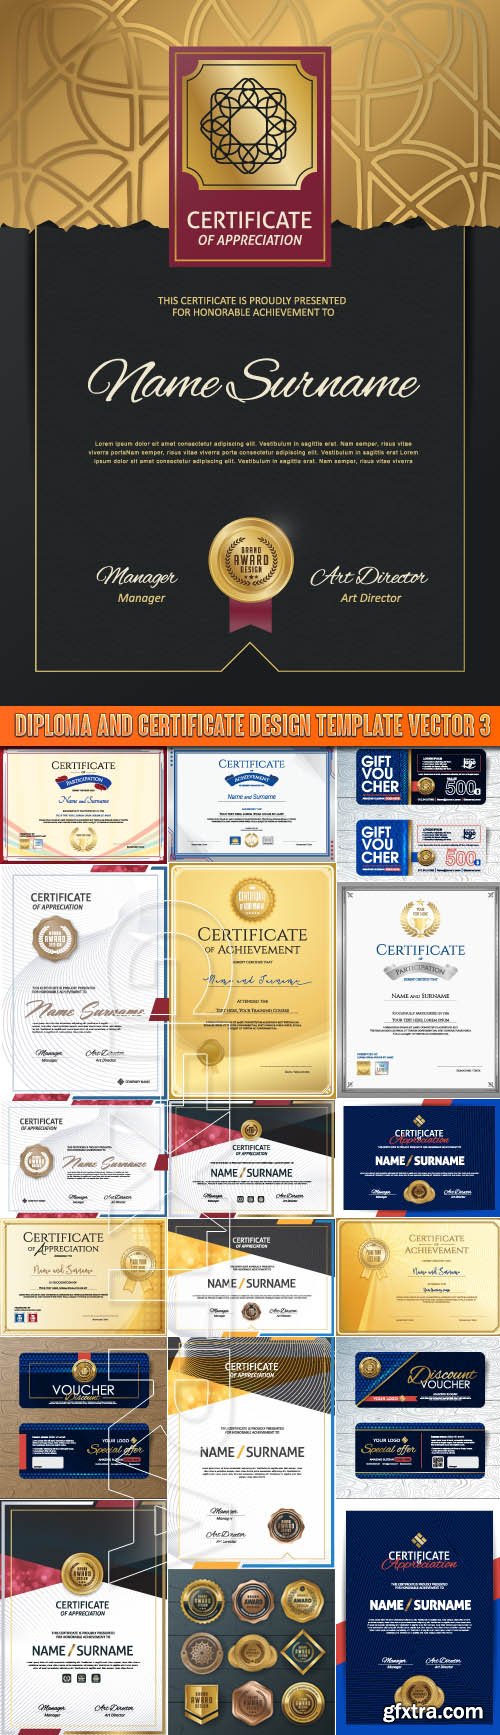 Diploma and certificate design template vector 3